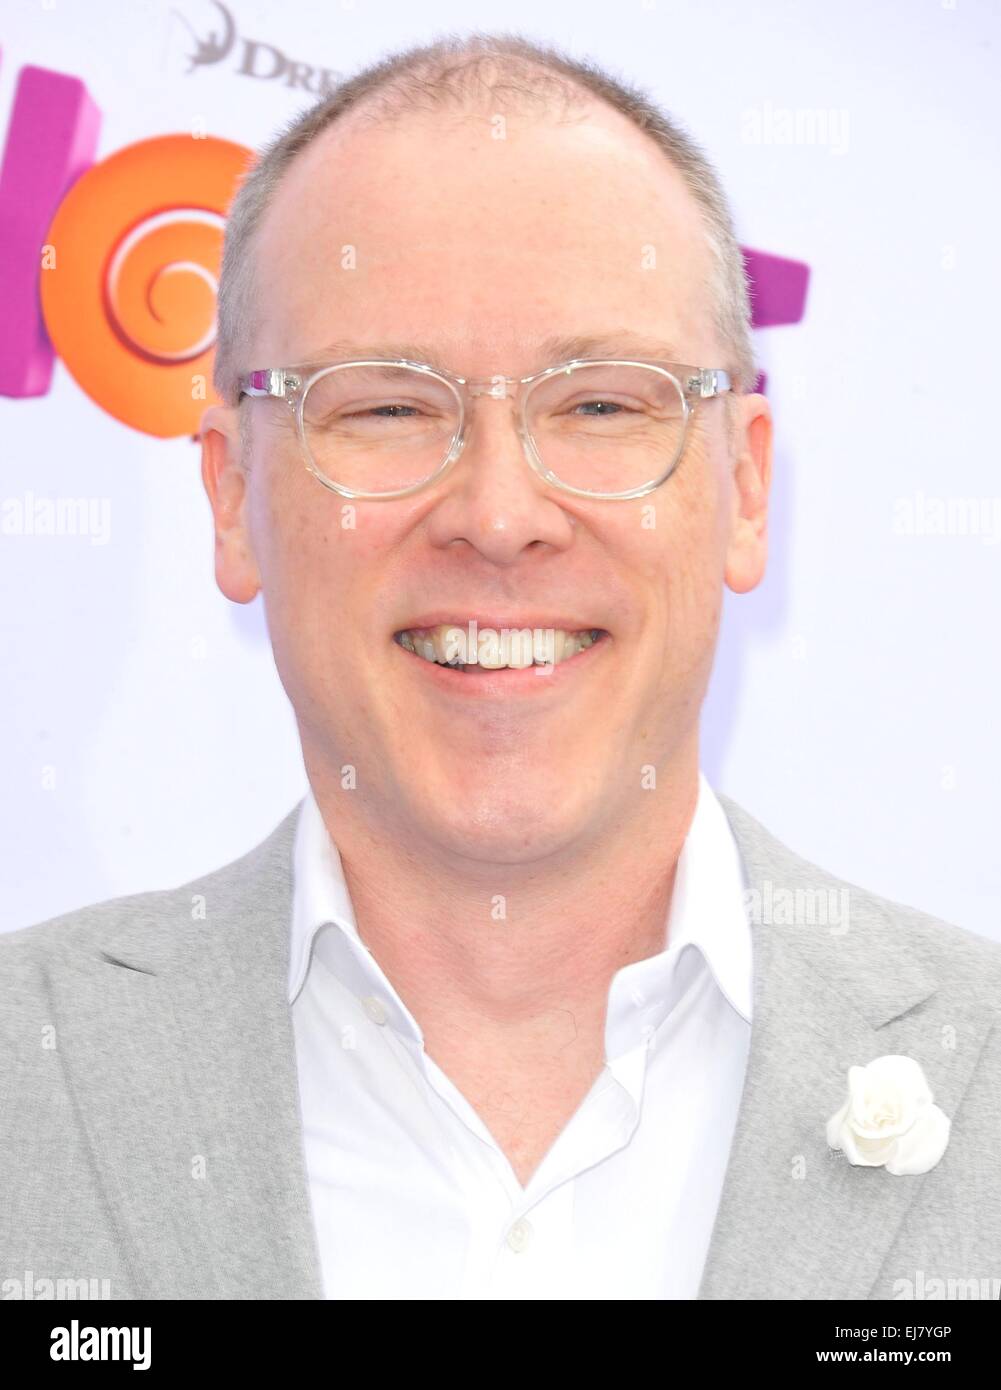 Los Angeles, California, USA. 23rd Mar, 2015. Tim Johnson at arrivals for HOME Premiere, The Regency Village Theatre, Los Angeles, CA March 23, 2015. Credit:  Dee Cercone/Everett Collection/Alamy Live News Stock Photo